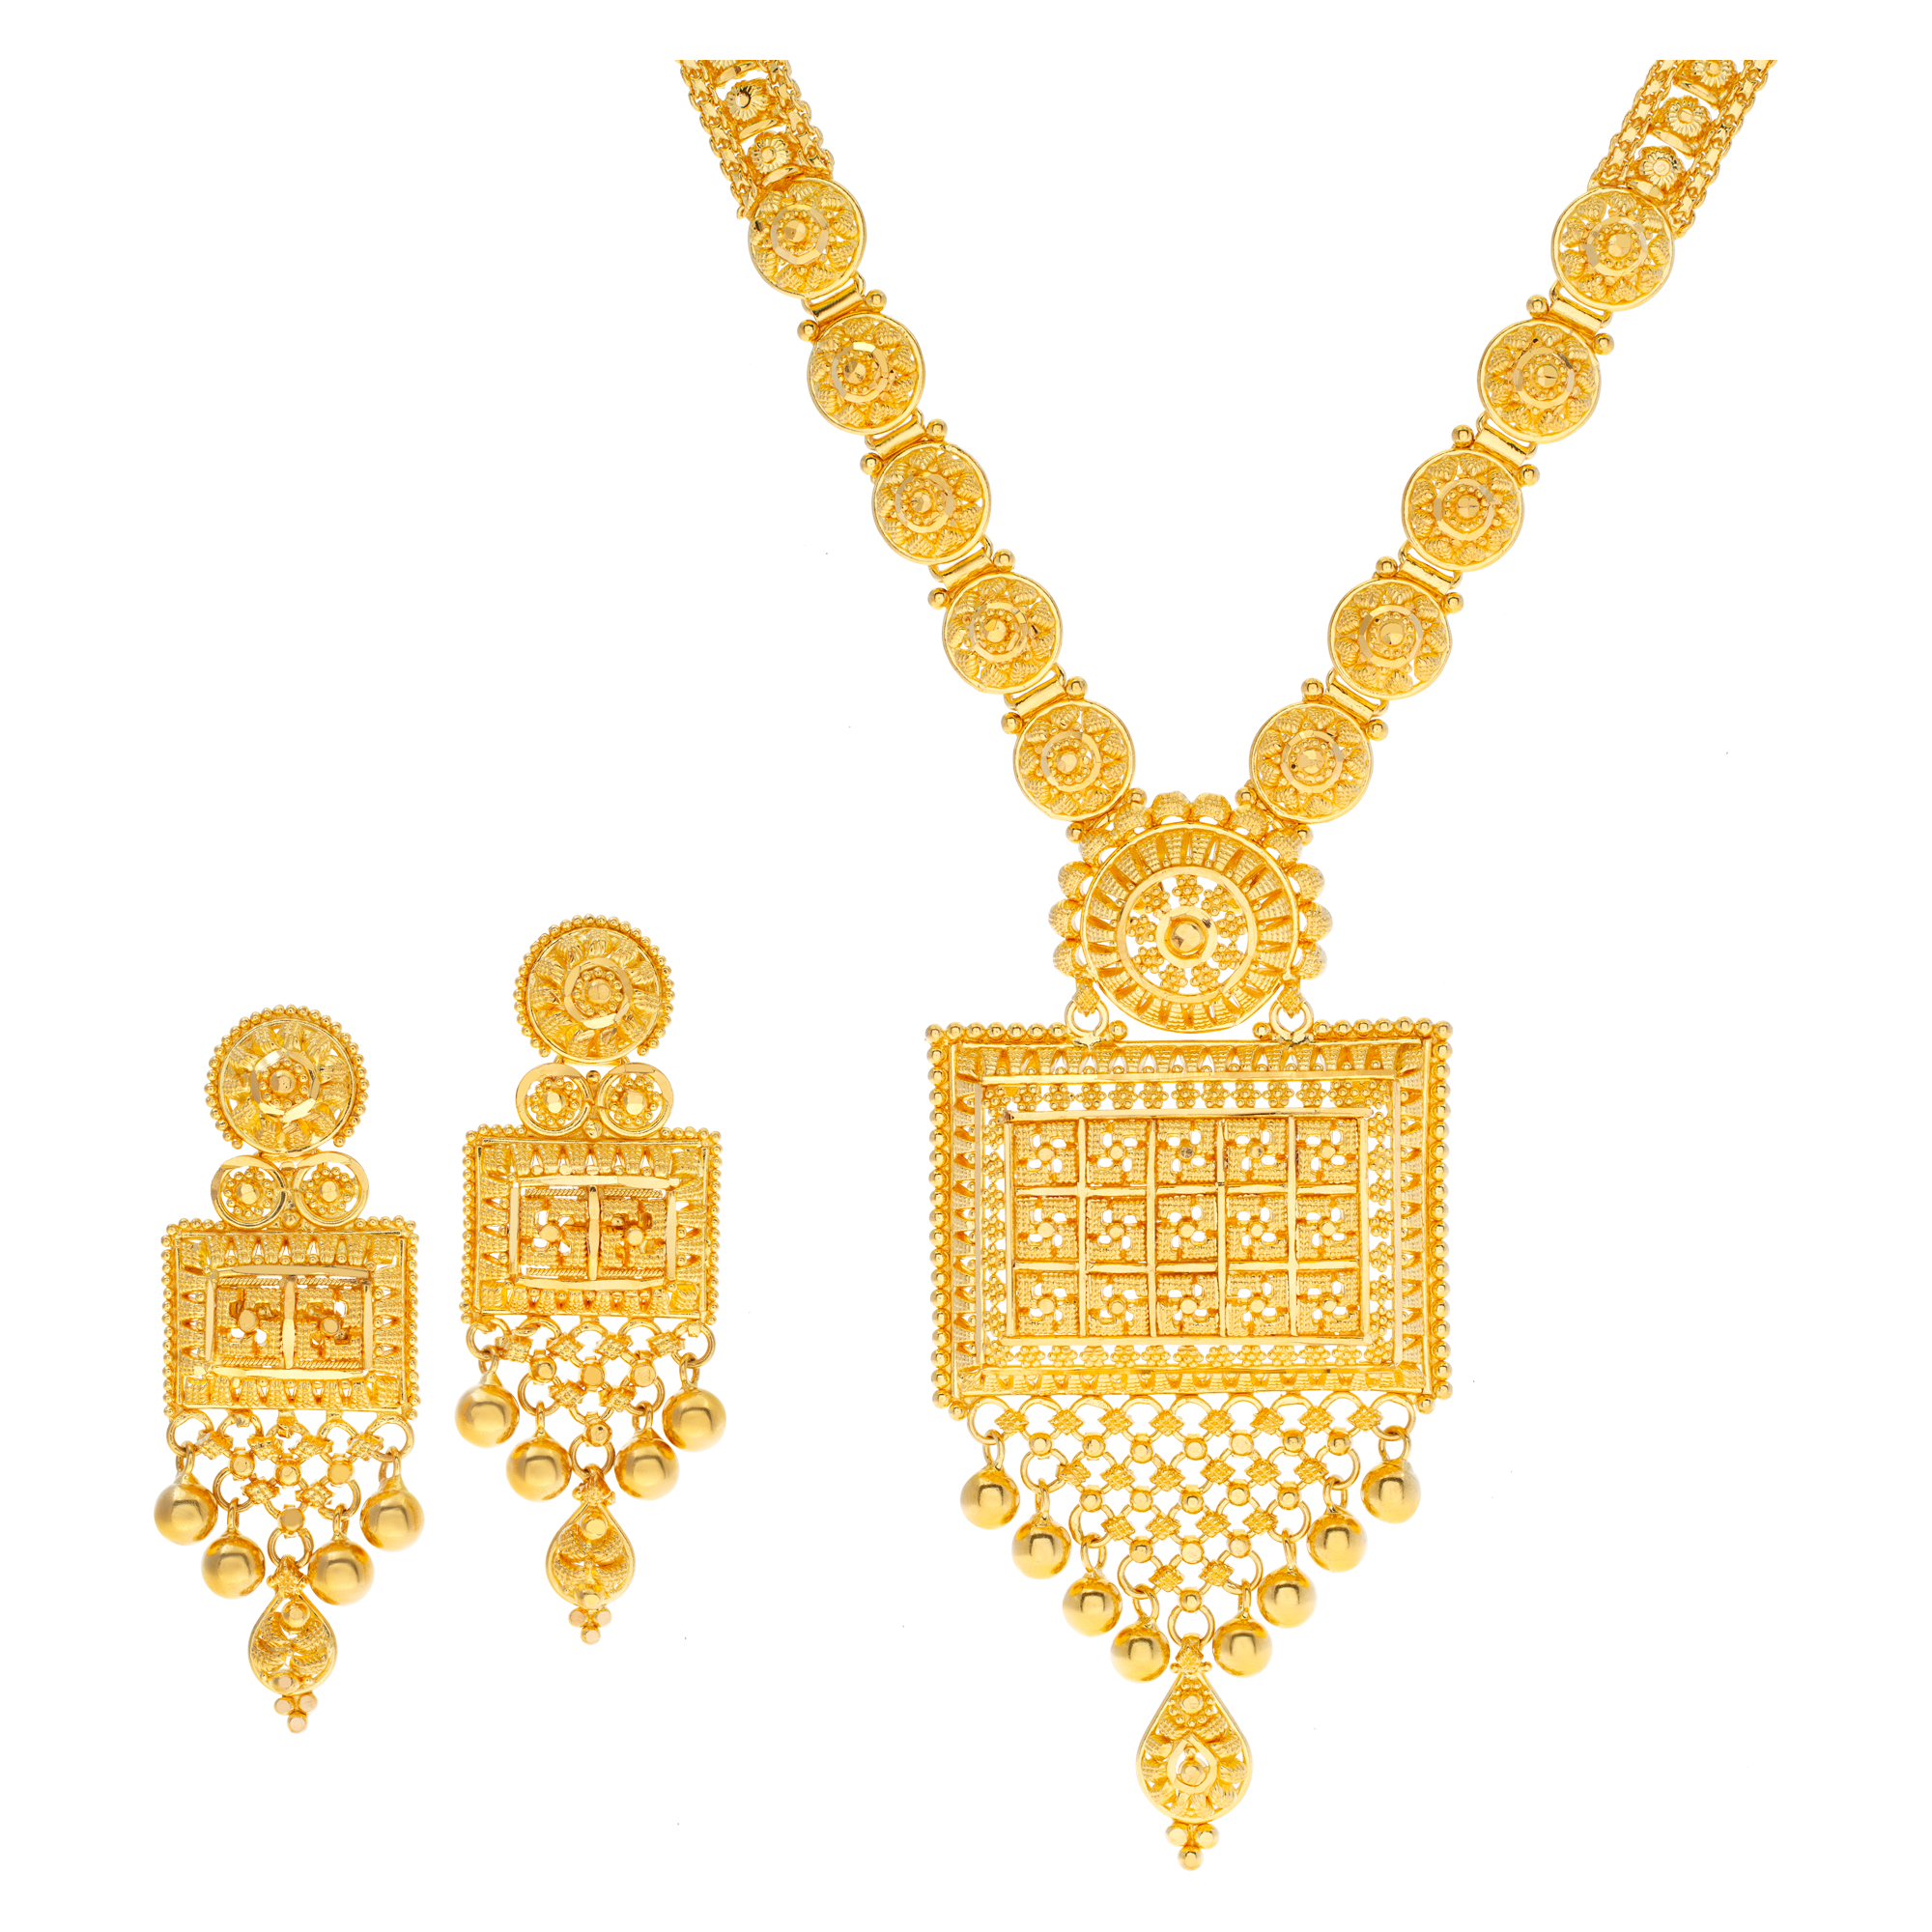 Etruscan Revival Necklace and earrings set in 22k